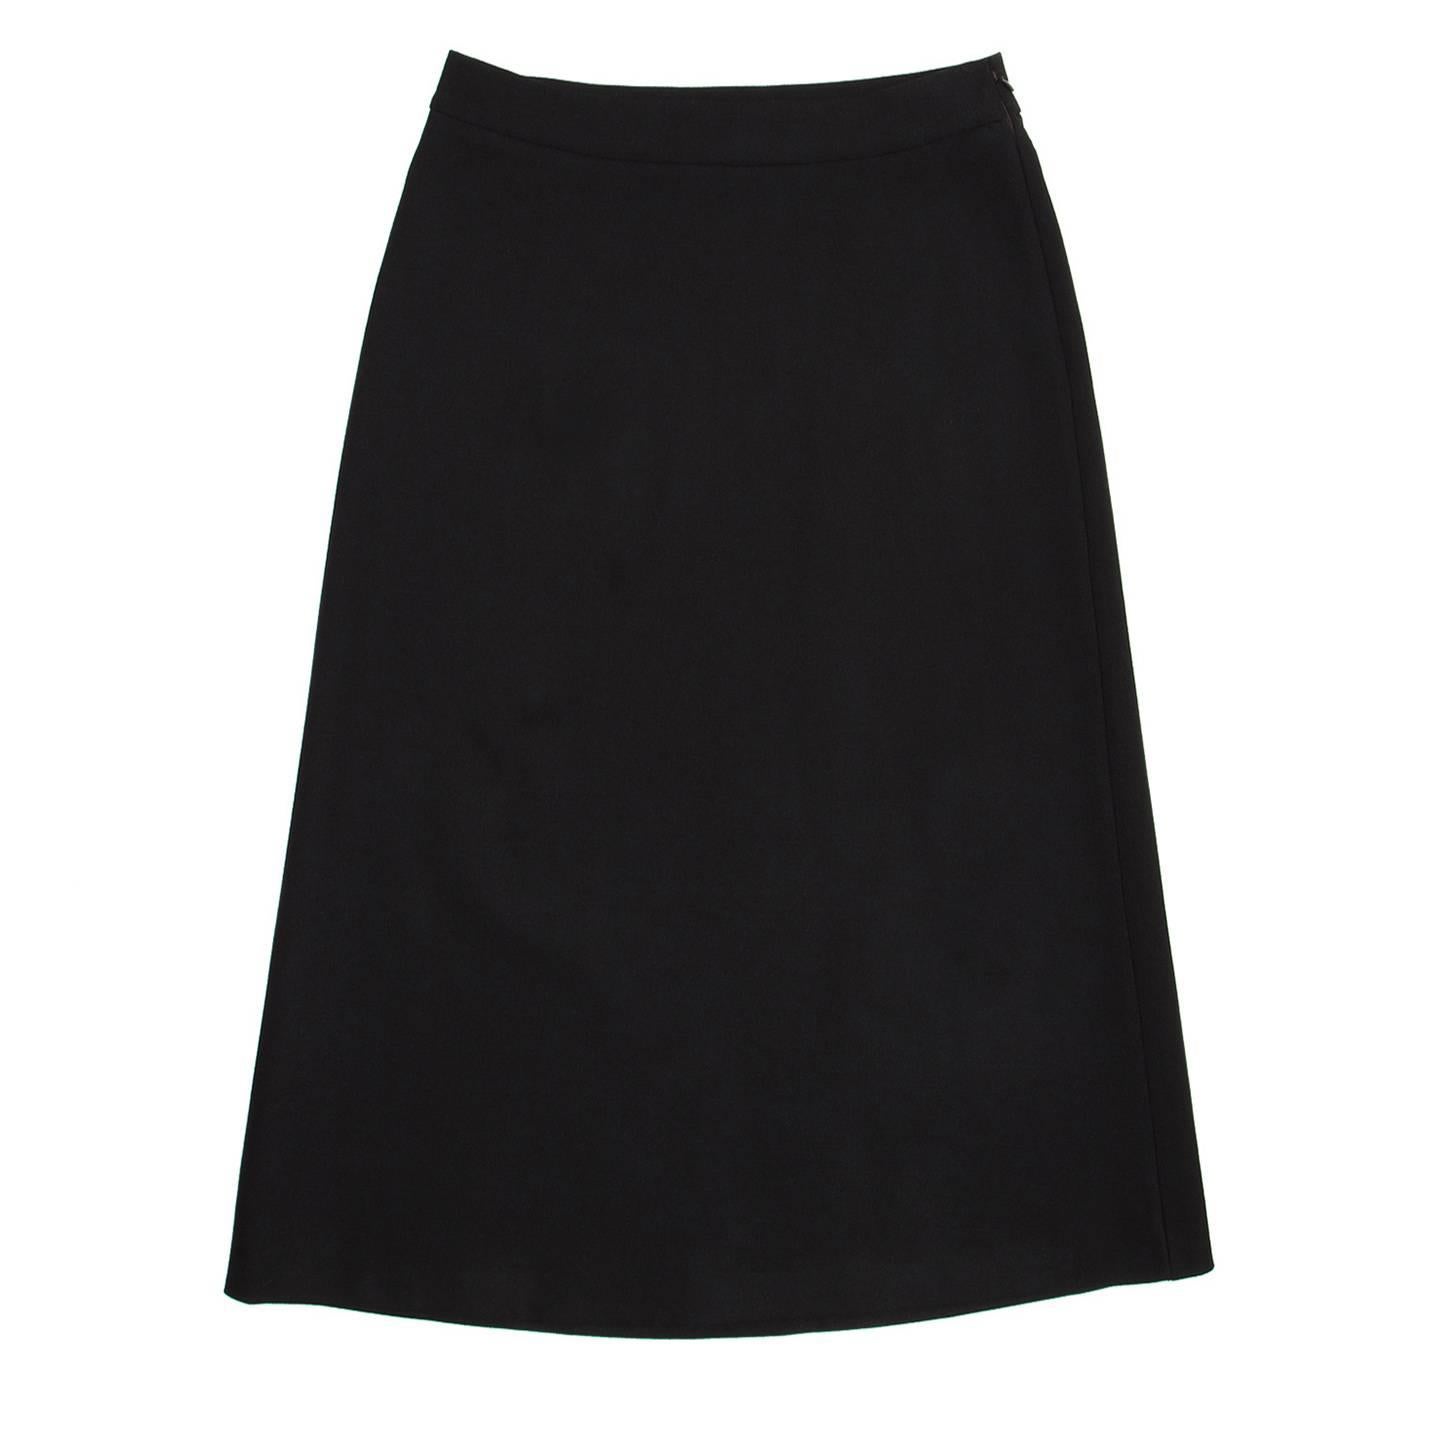 Prada black wool A-line high waisted skirt with below knee length.

Size  44 Italian sizing

Condition  Excellent: worn a few times